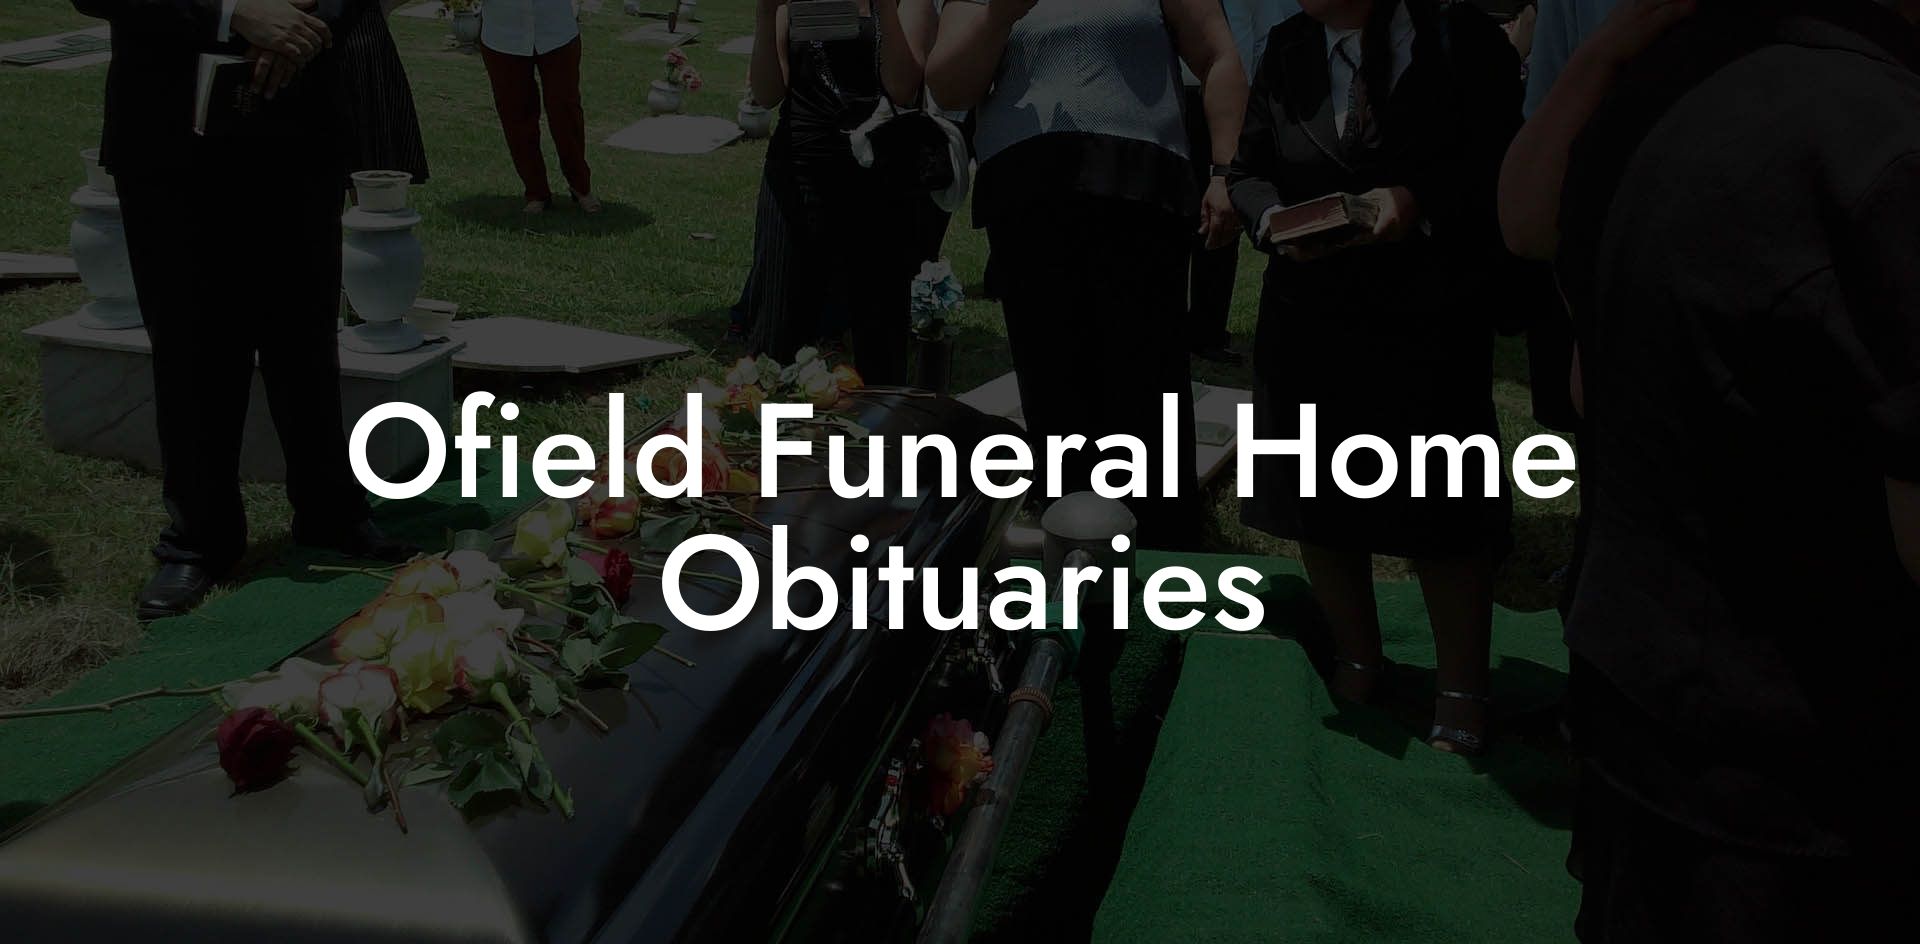 Ofield Funeral Home Obituaries